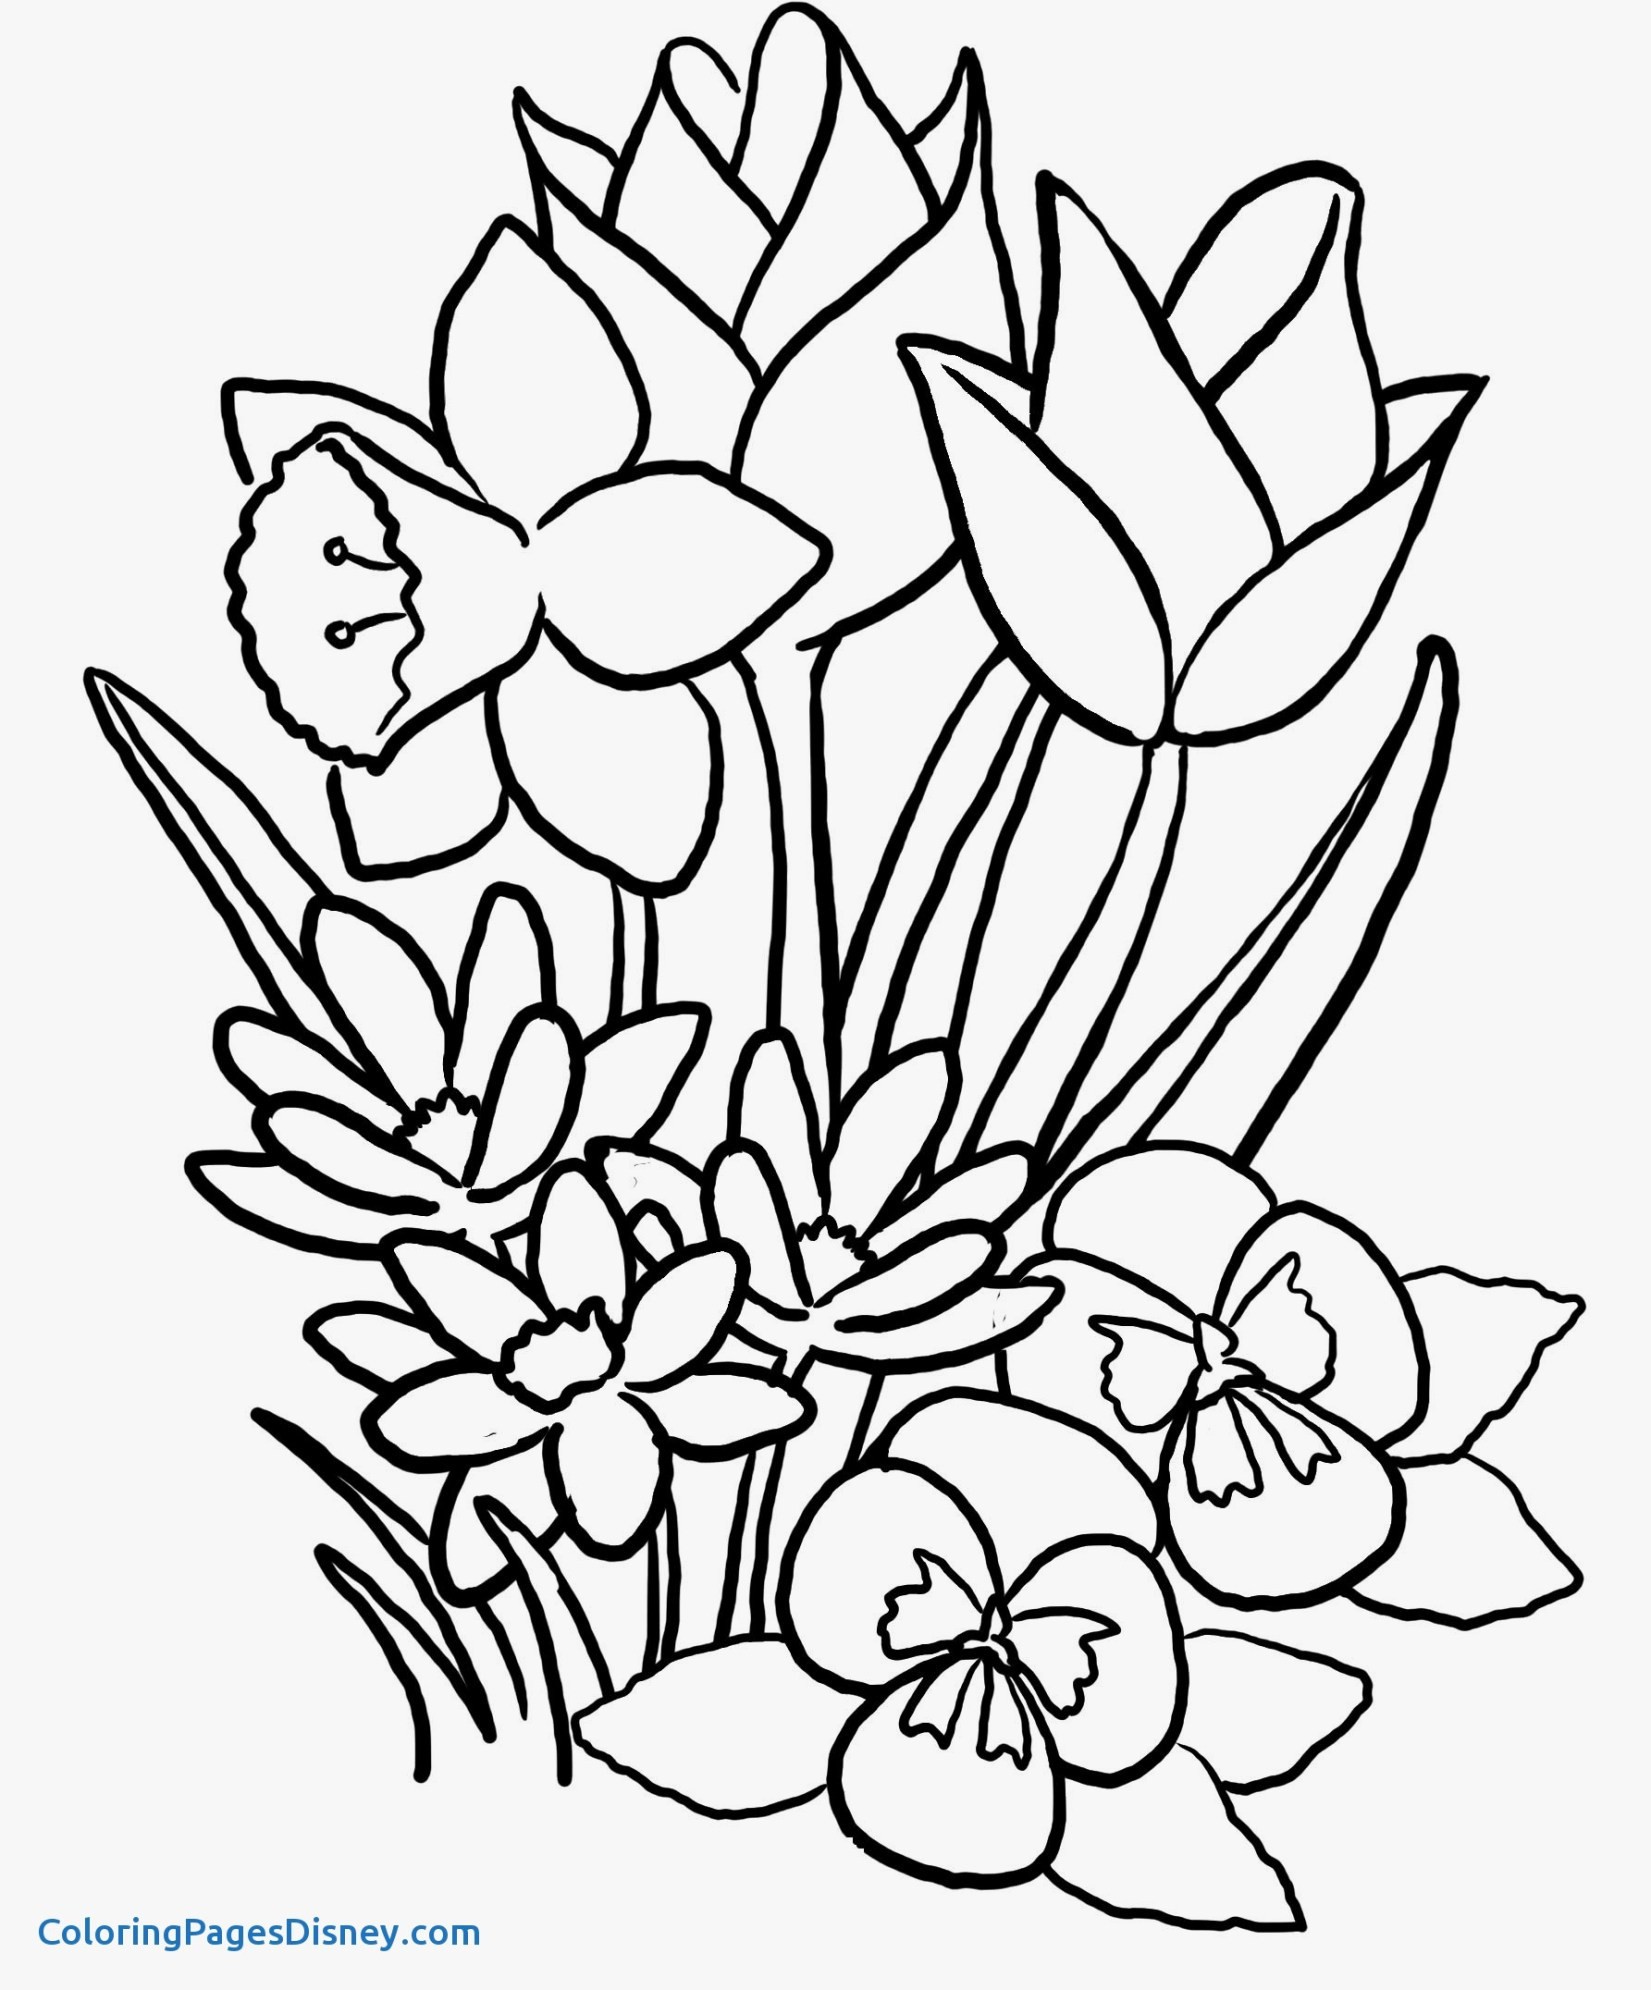 Coloring Pages Flowers and butterflies Luxury Coloring Pages butterflies New Cool Vases Flower Vase Coloring